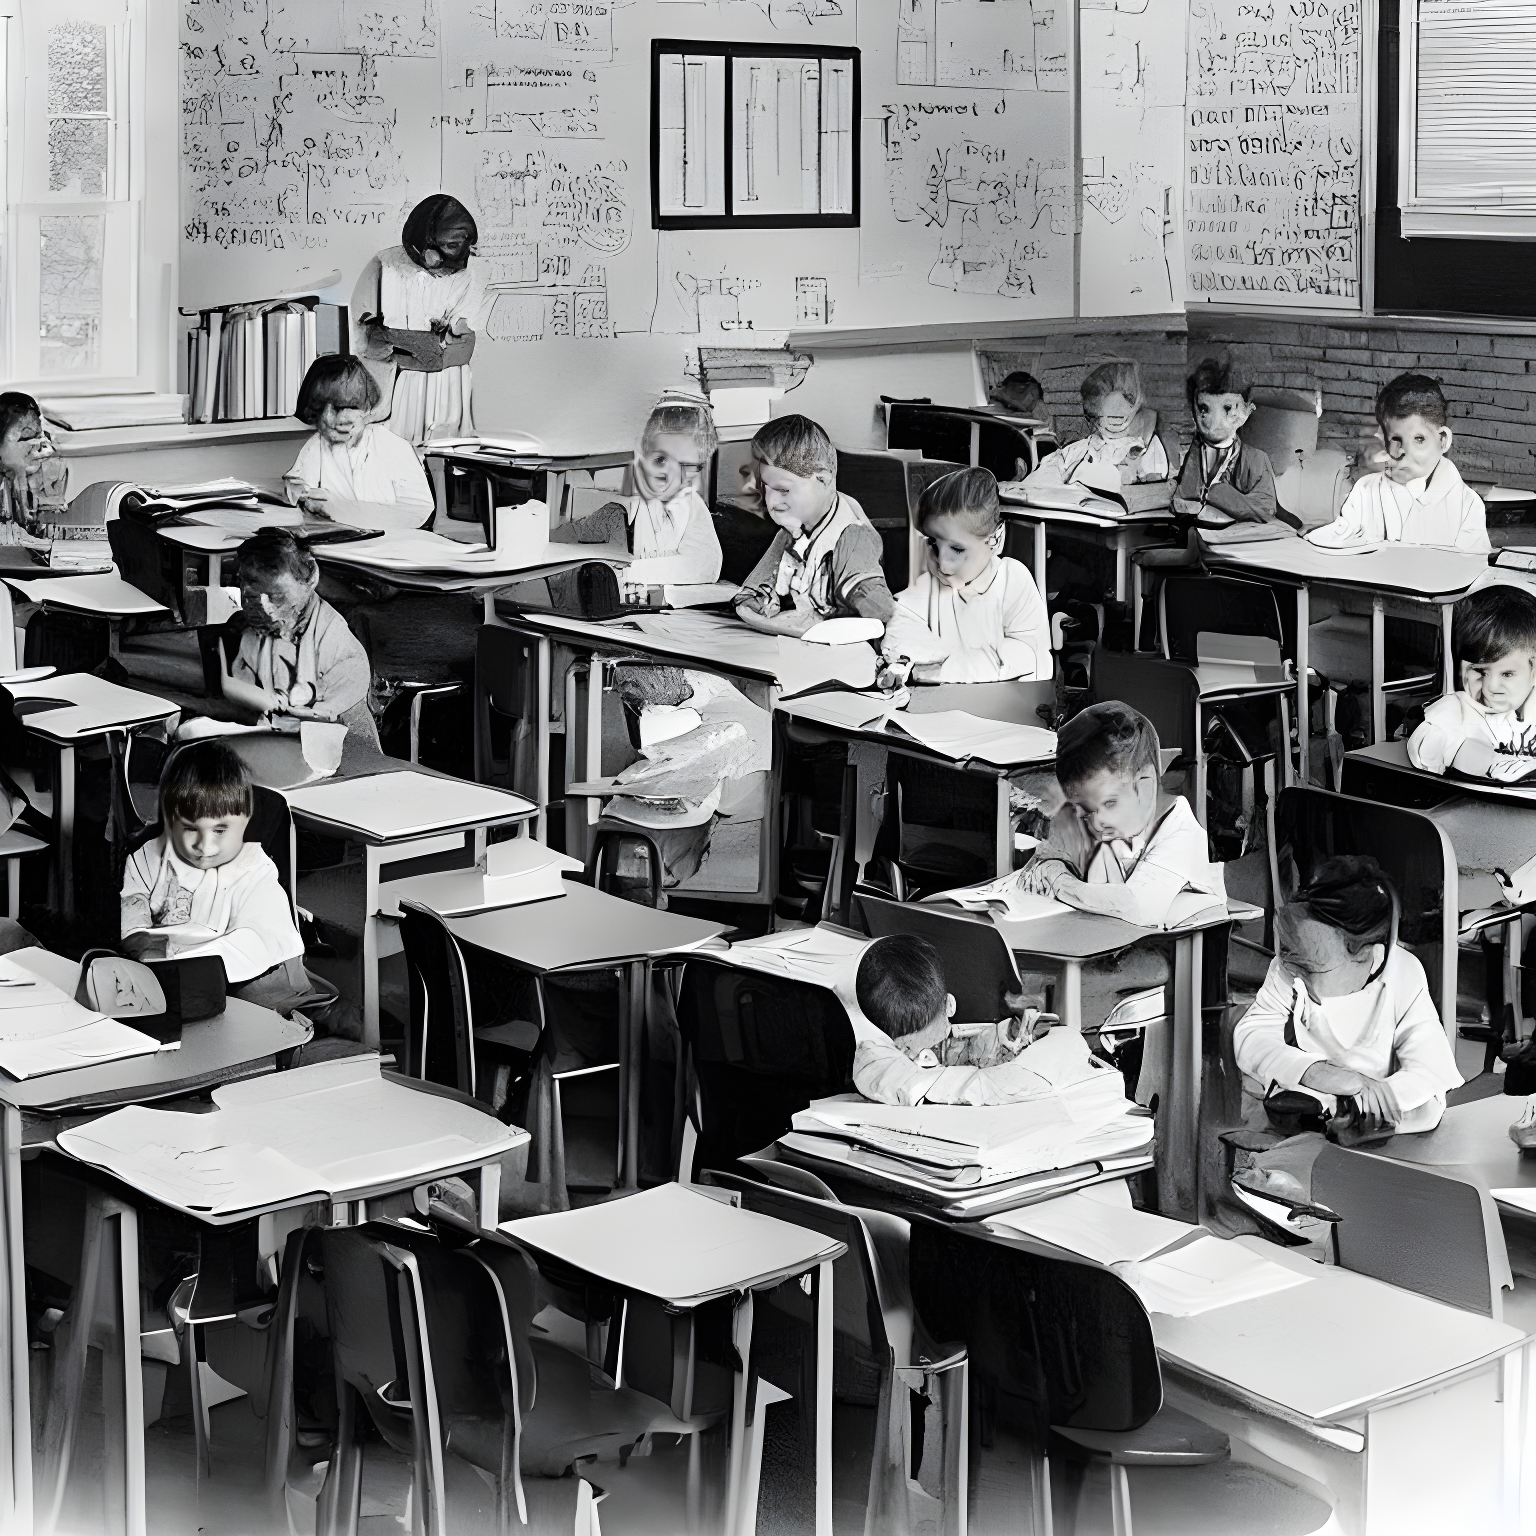 a pencil sketch of classroom kids looking towards the teacher which is an old style pc computer on a desk